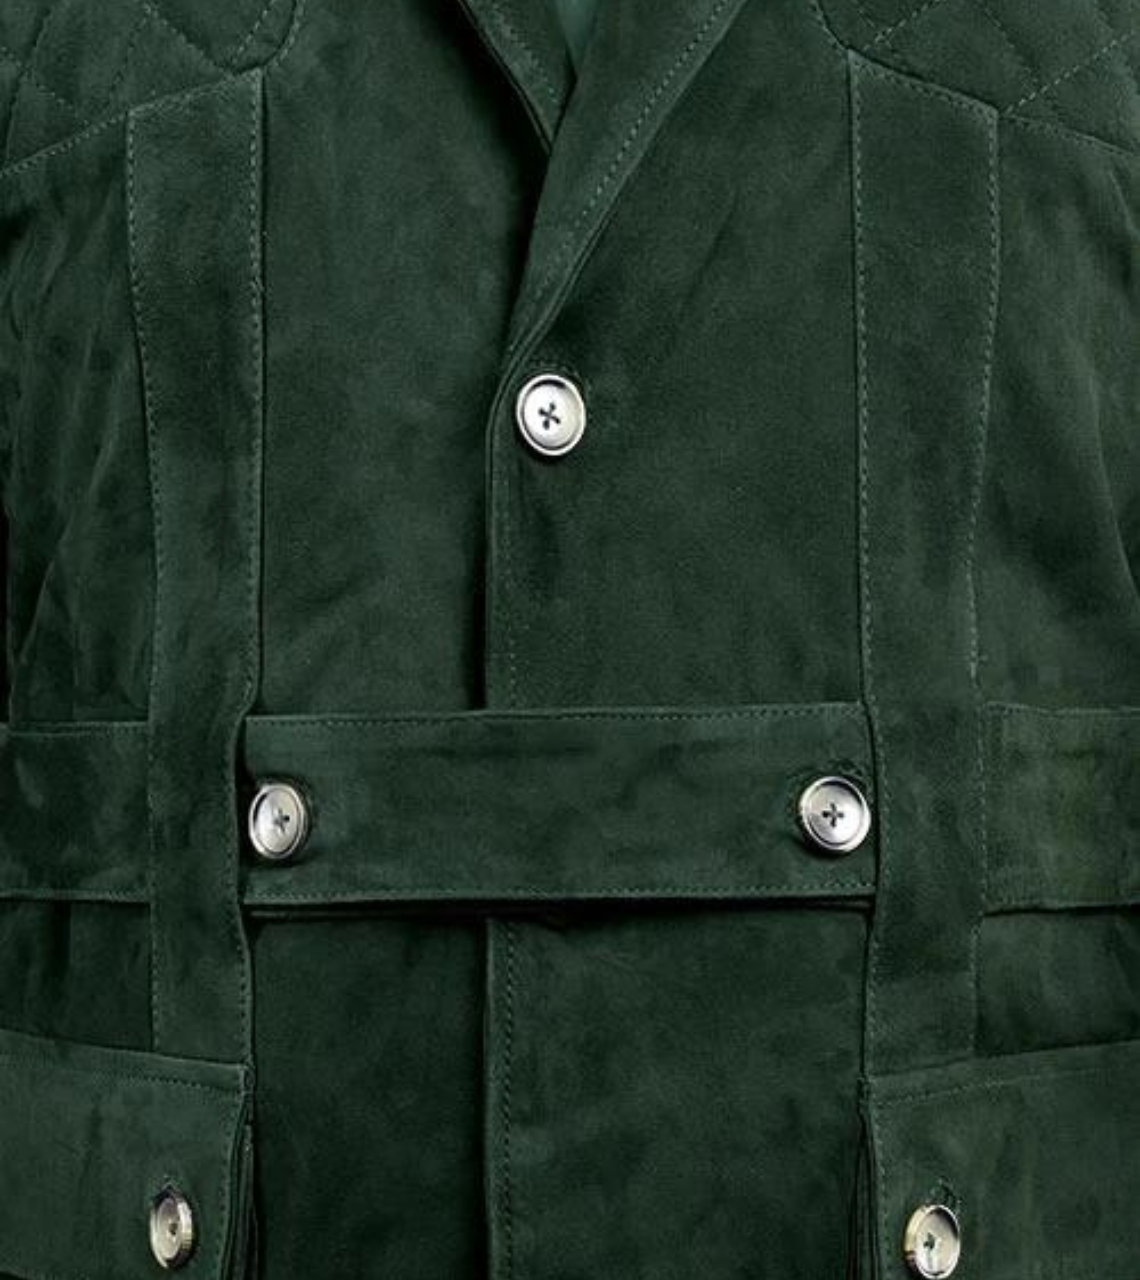  Men's Green Suede Leather Jacket